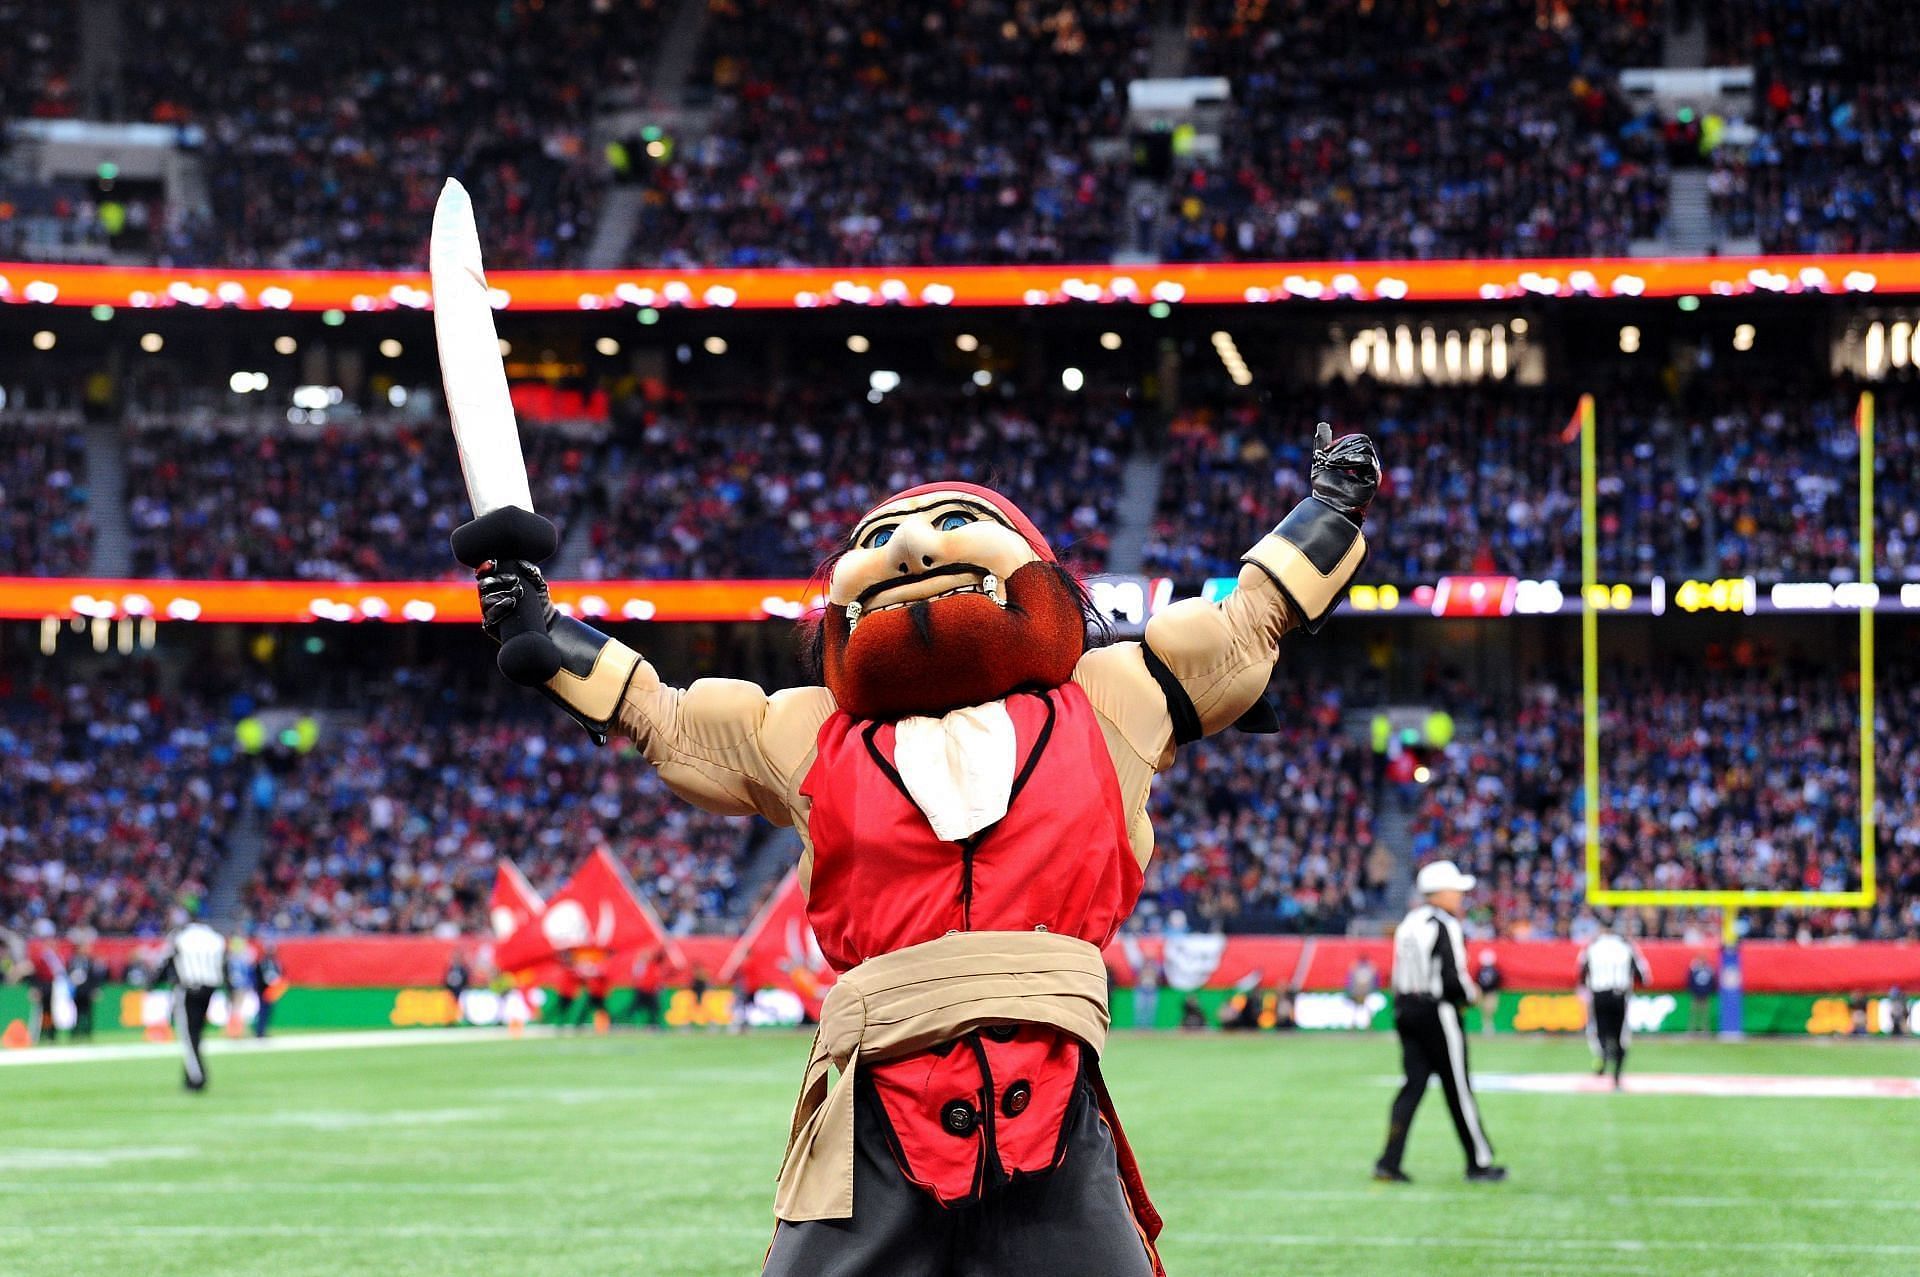 Tampa Bay Buccaneers&rsquo; mascot Captain Fear